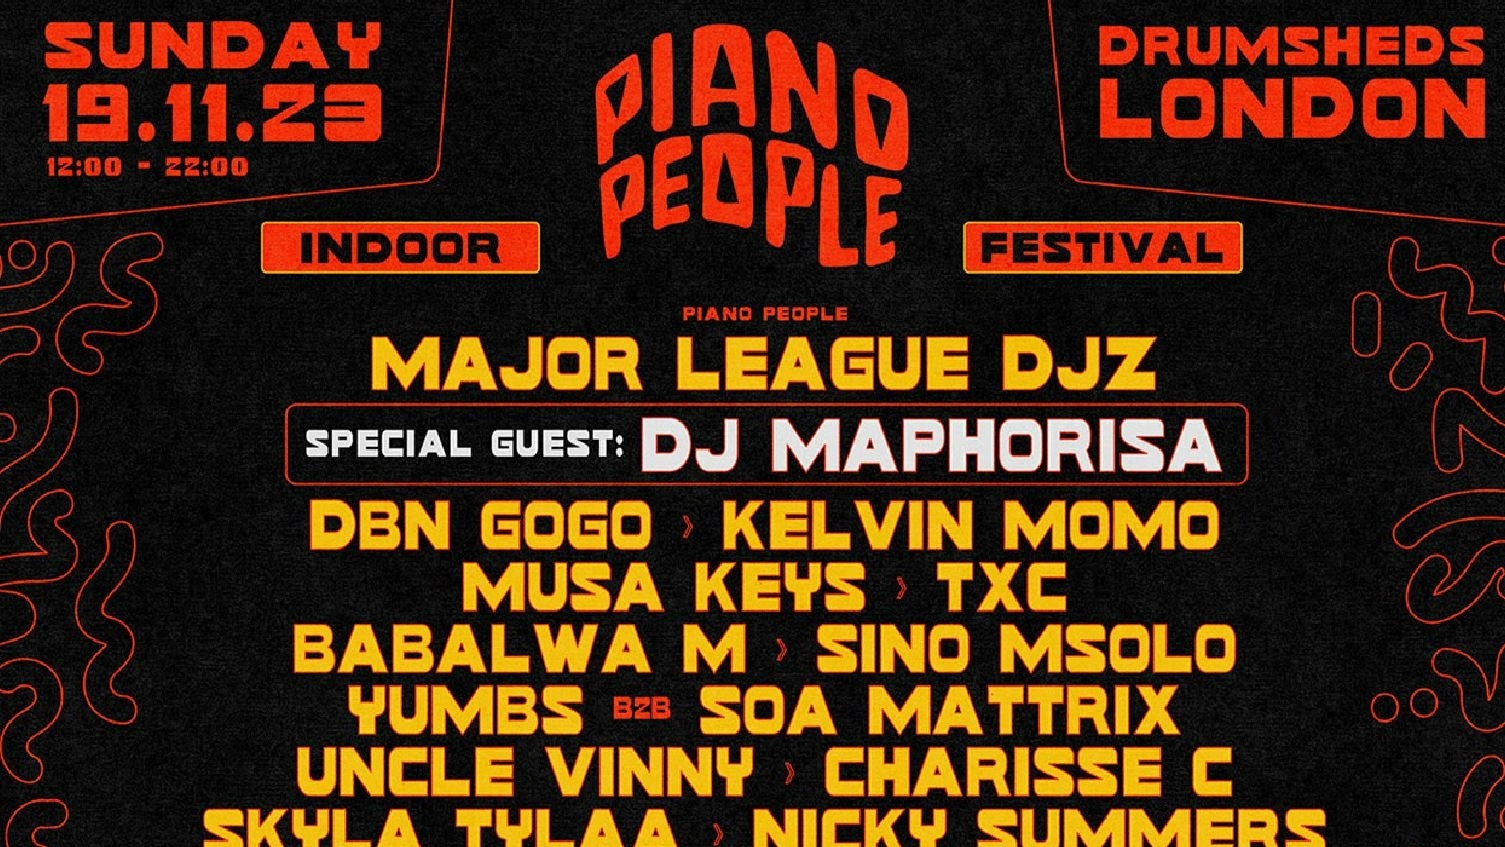 Piano People Indoor Festival London Tickets at The Drumsheds on 19th November 2023 | Ents24